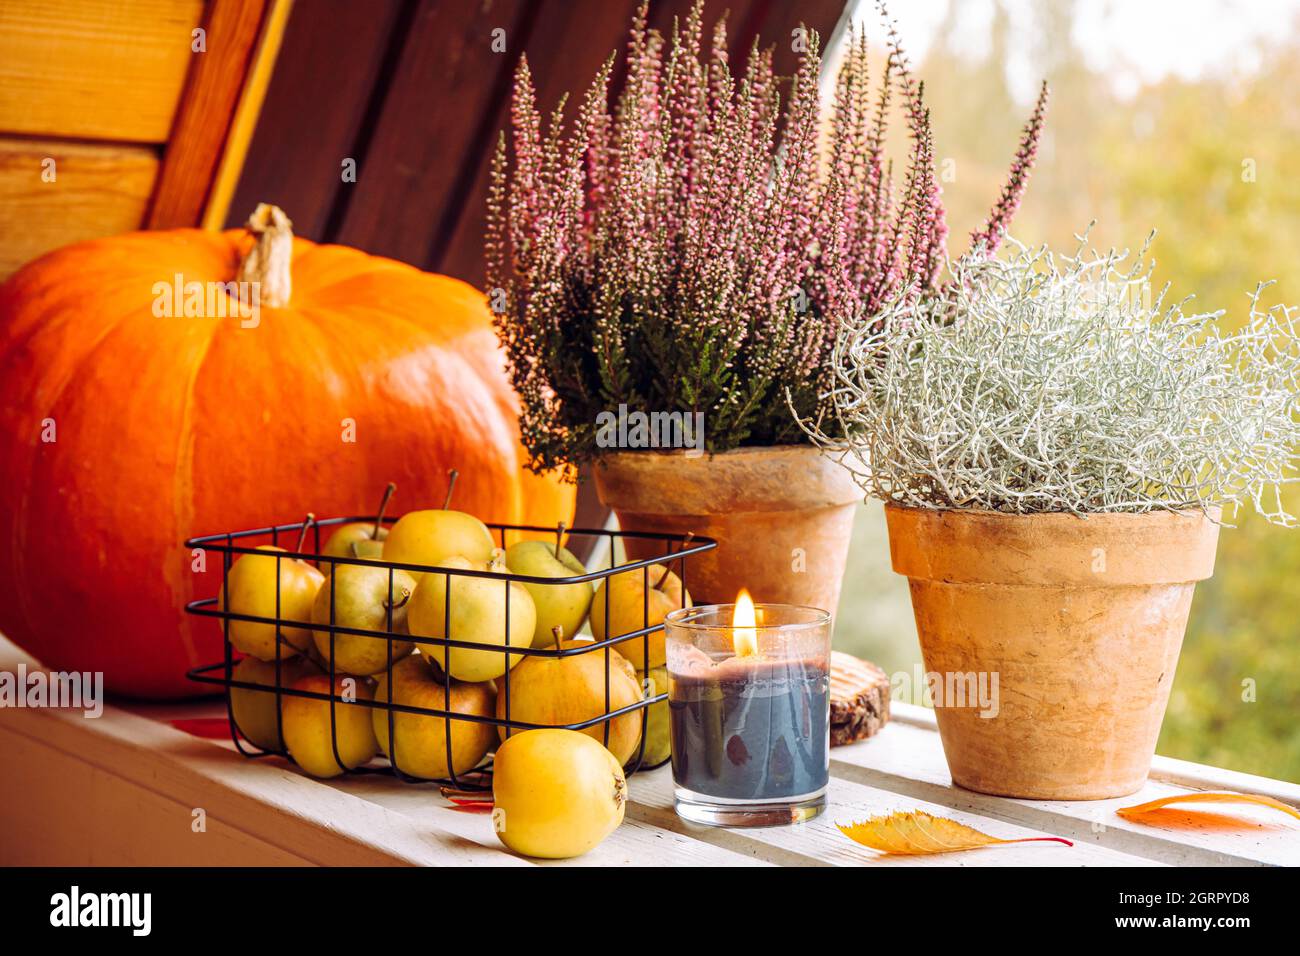 Decorative Silver color Cushion bush, Calocephalus brownii or Leucophyta and heather flowers as autumn home decoration element, decorated with apples. Stock Photo